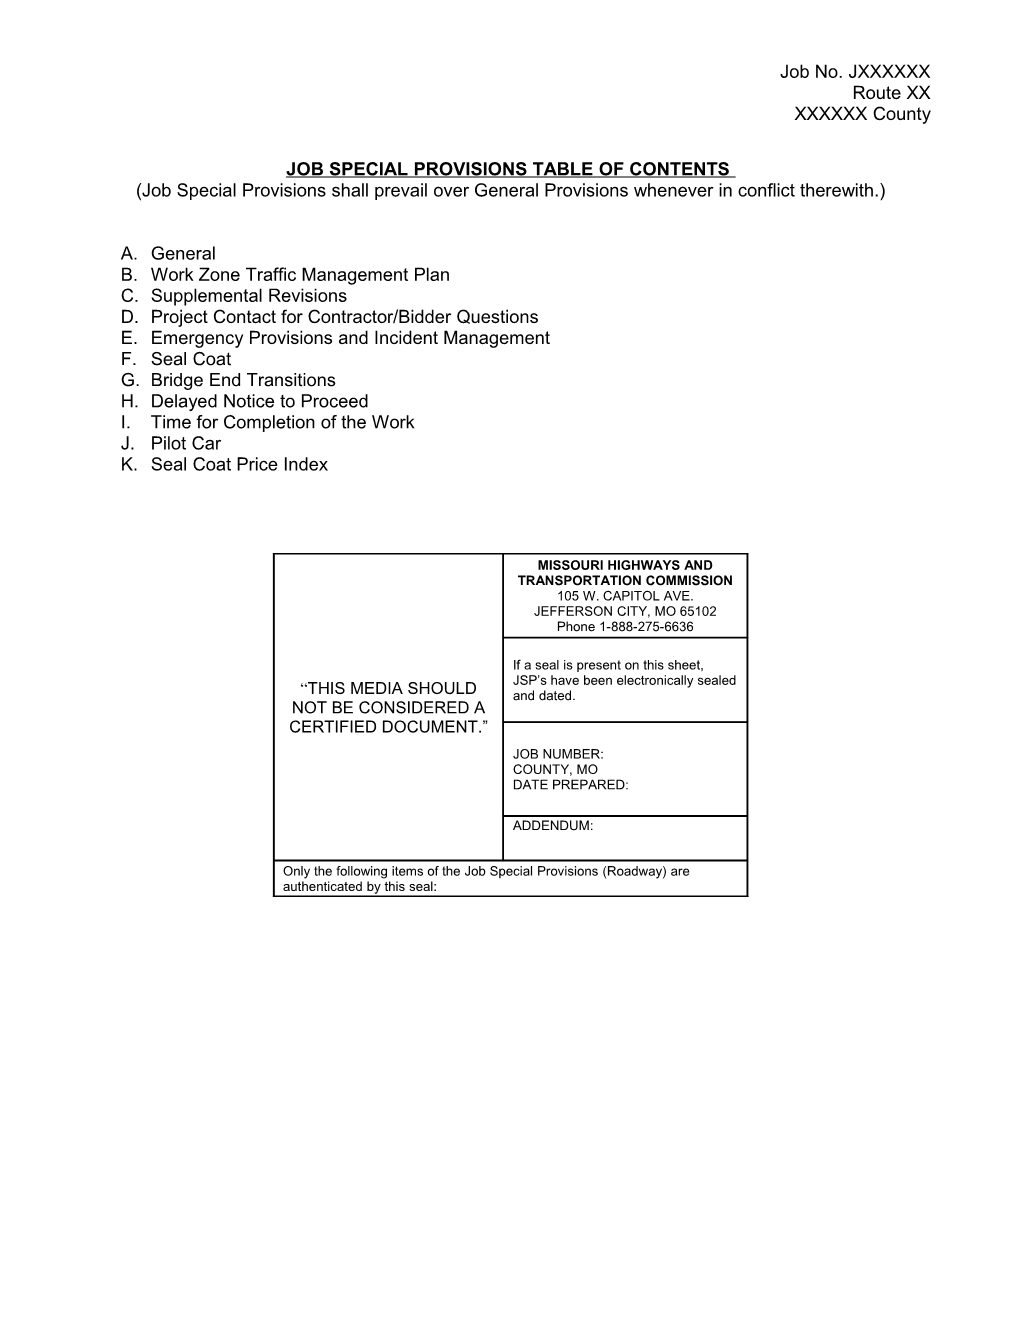 Job Special Provisions Table of Contents (Roadway) s1